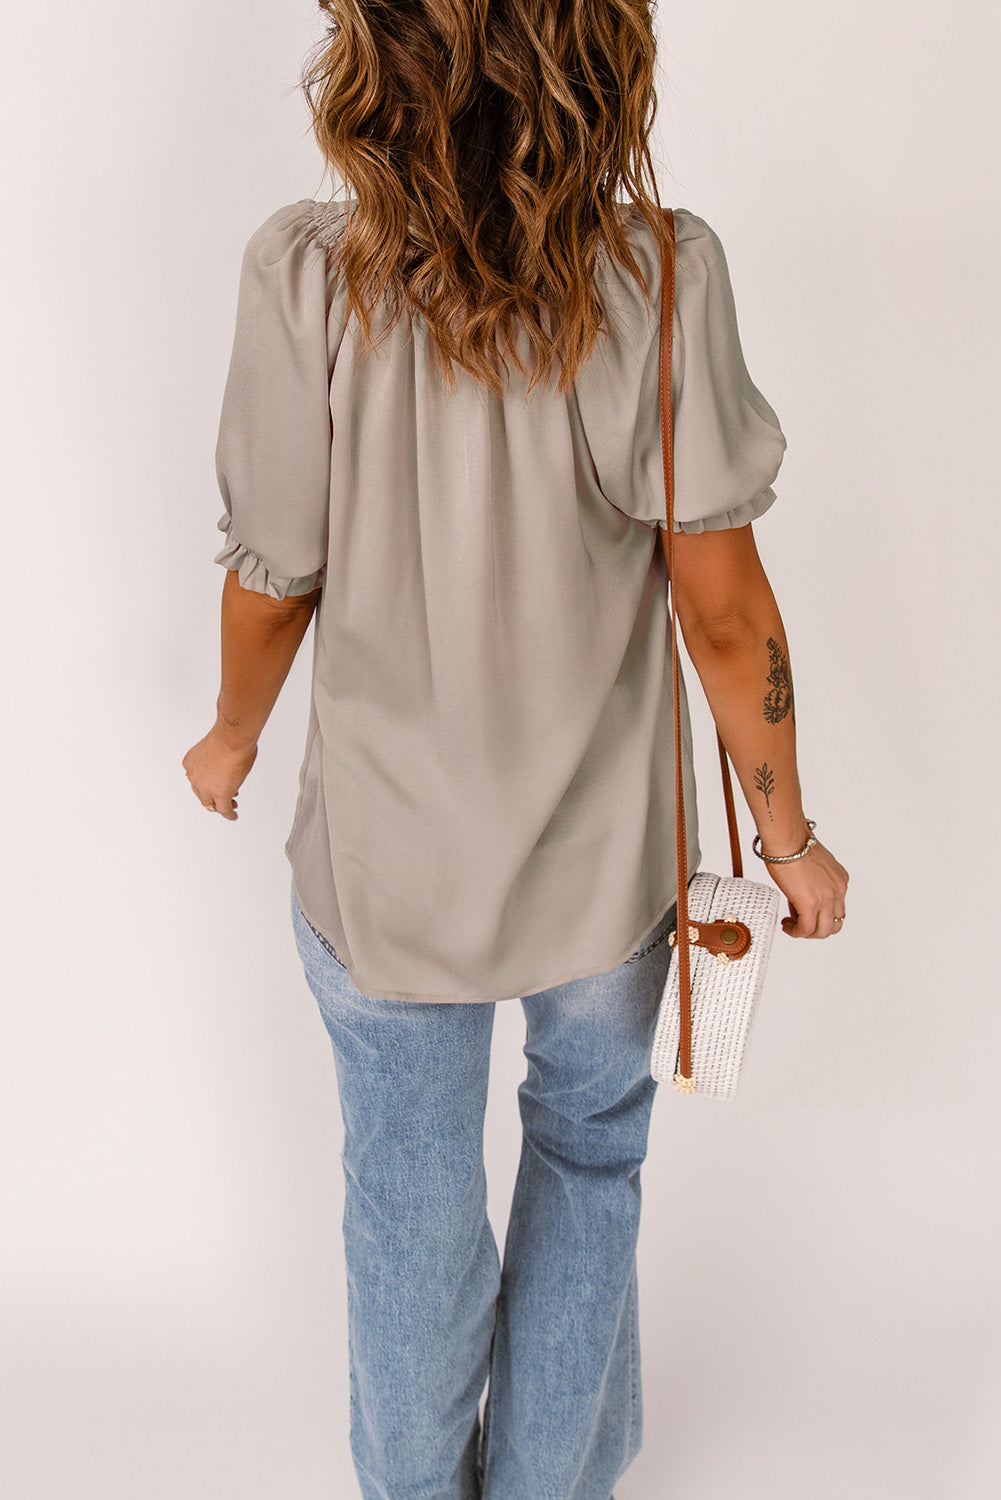 Smocked Frill Trim Flounce Sleeve Blouse - 2 colors